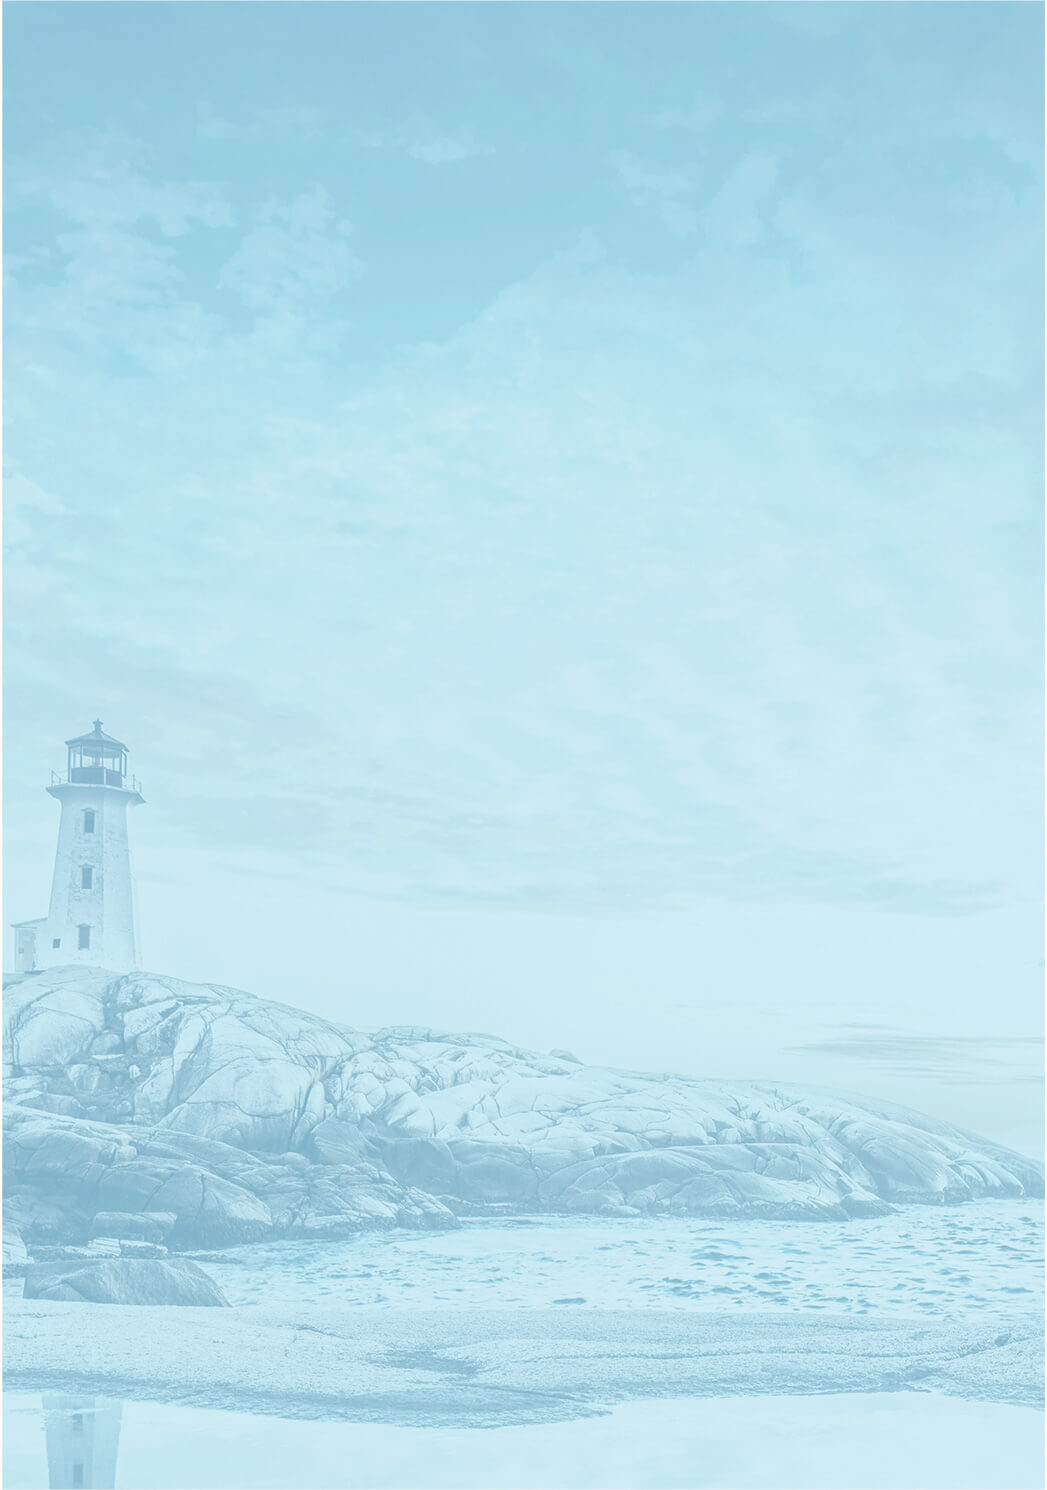 Calming Lighthouse and Sea Landscape with Blue Overlay.